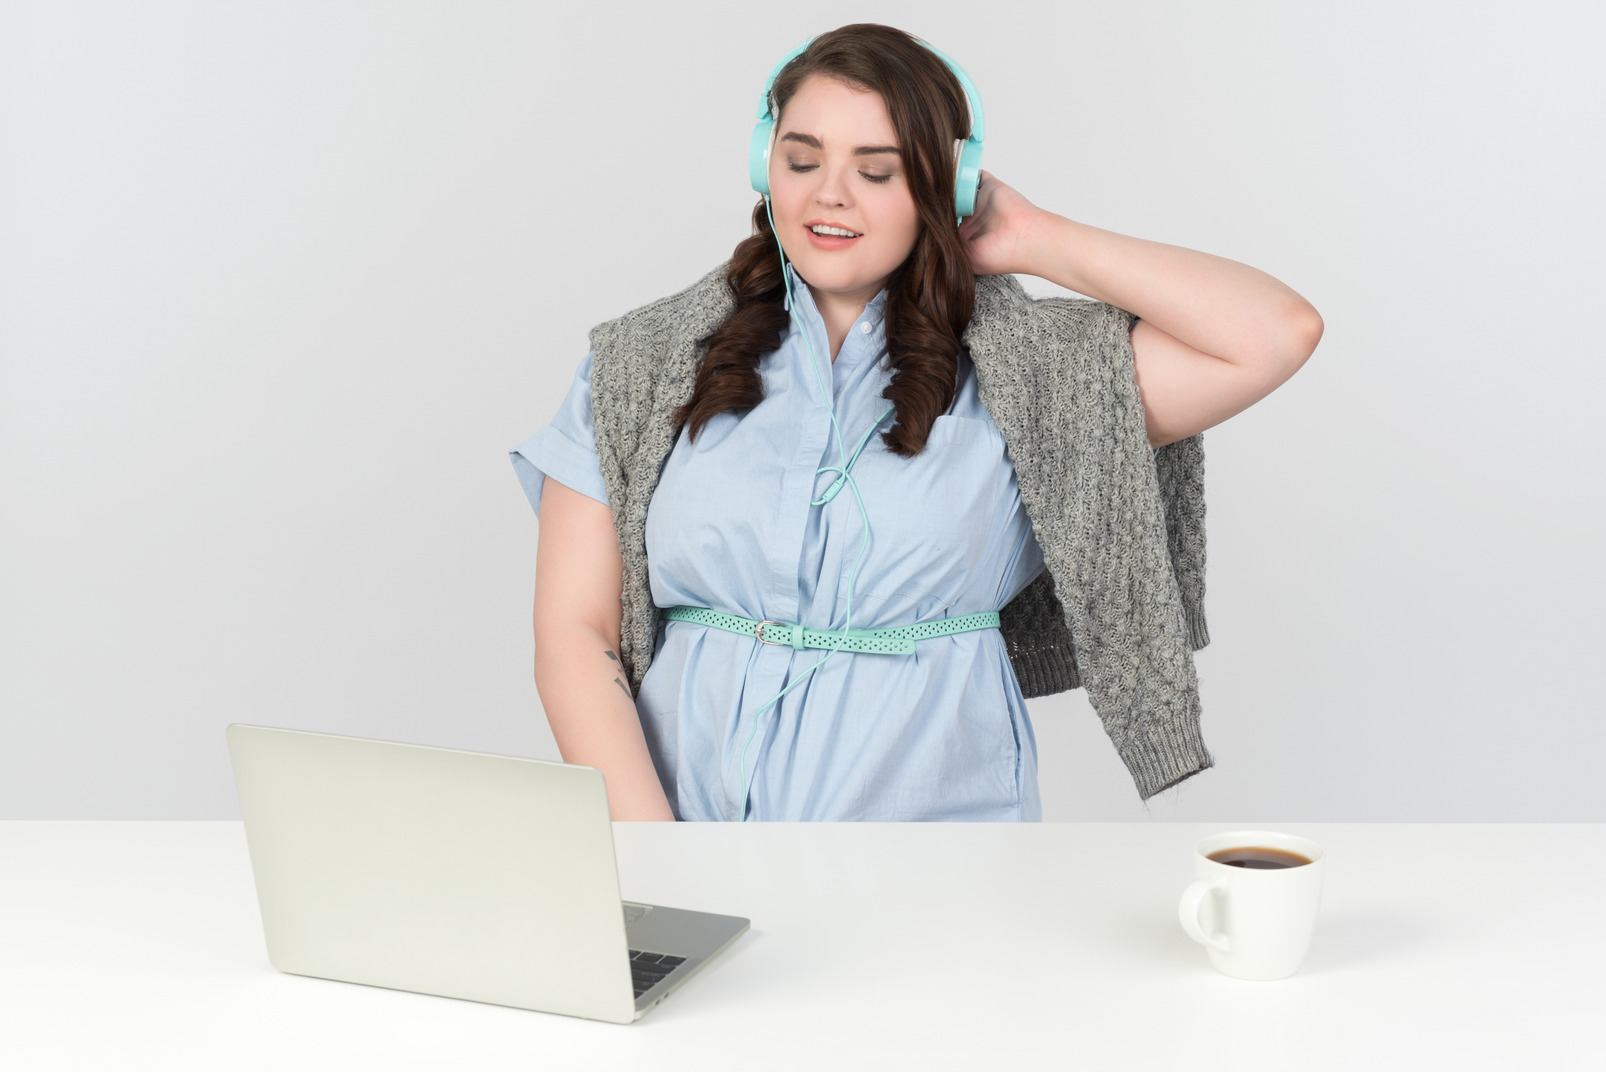 Calm young plus-size model listening to music on laptop